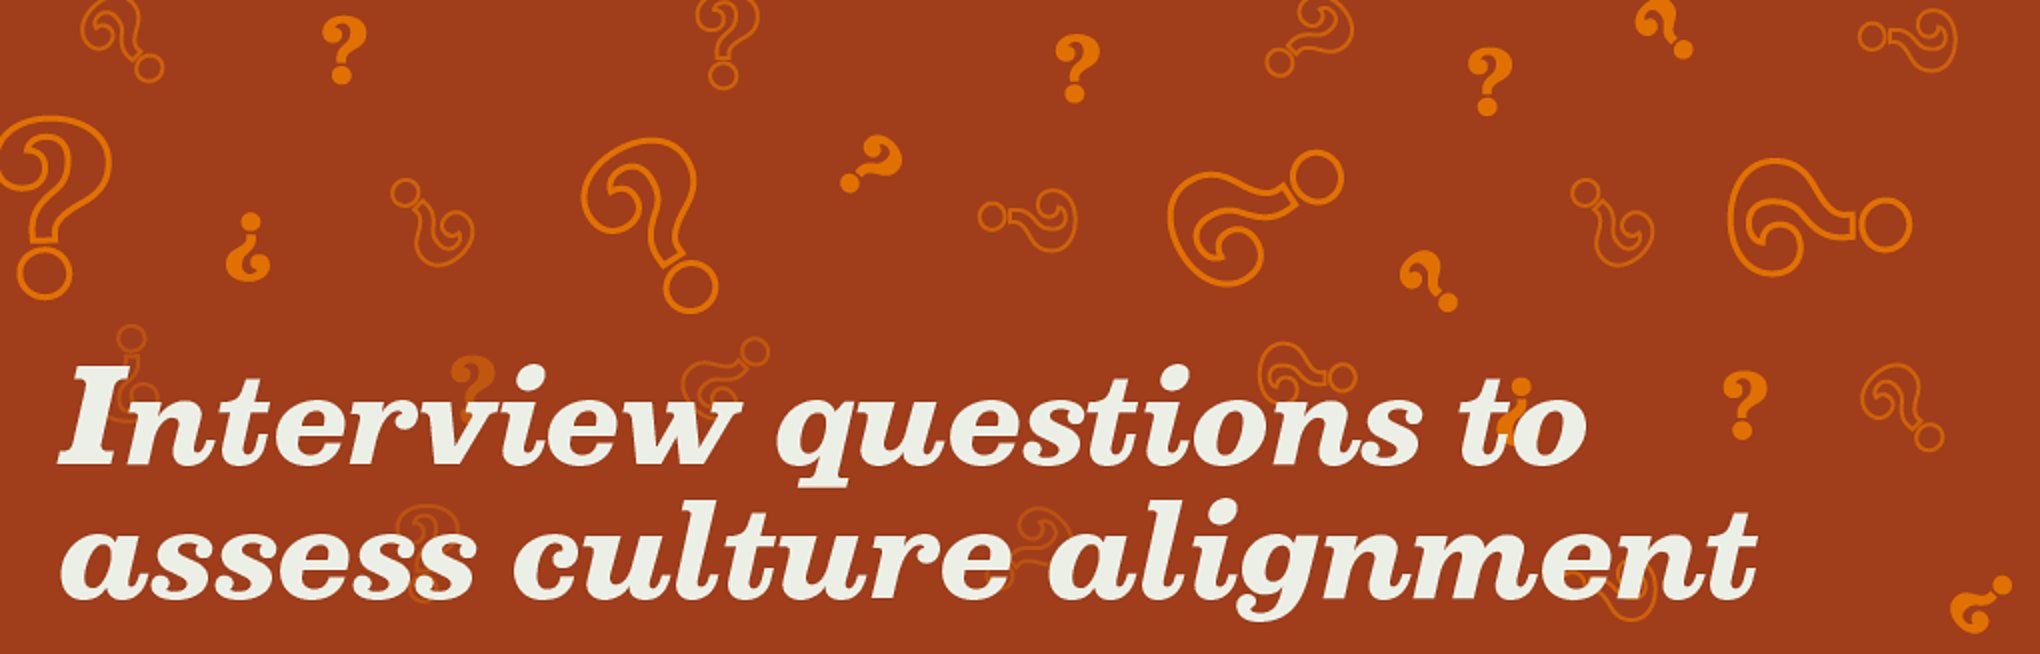 Question marks in the background with caption "Interview questions to assess culture alignment"